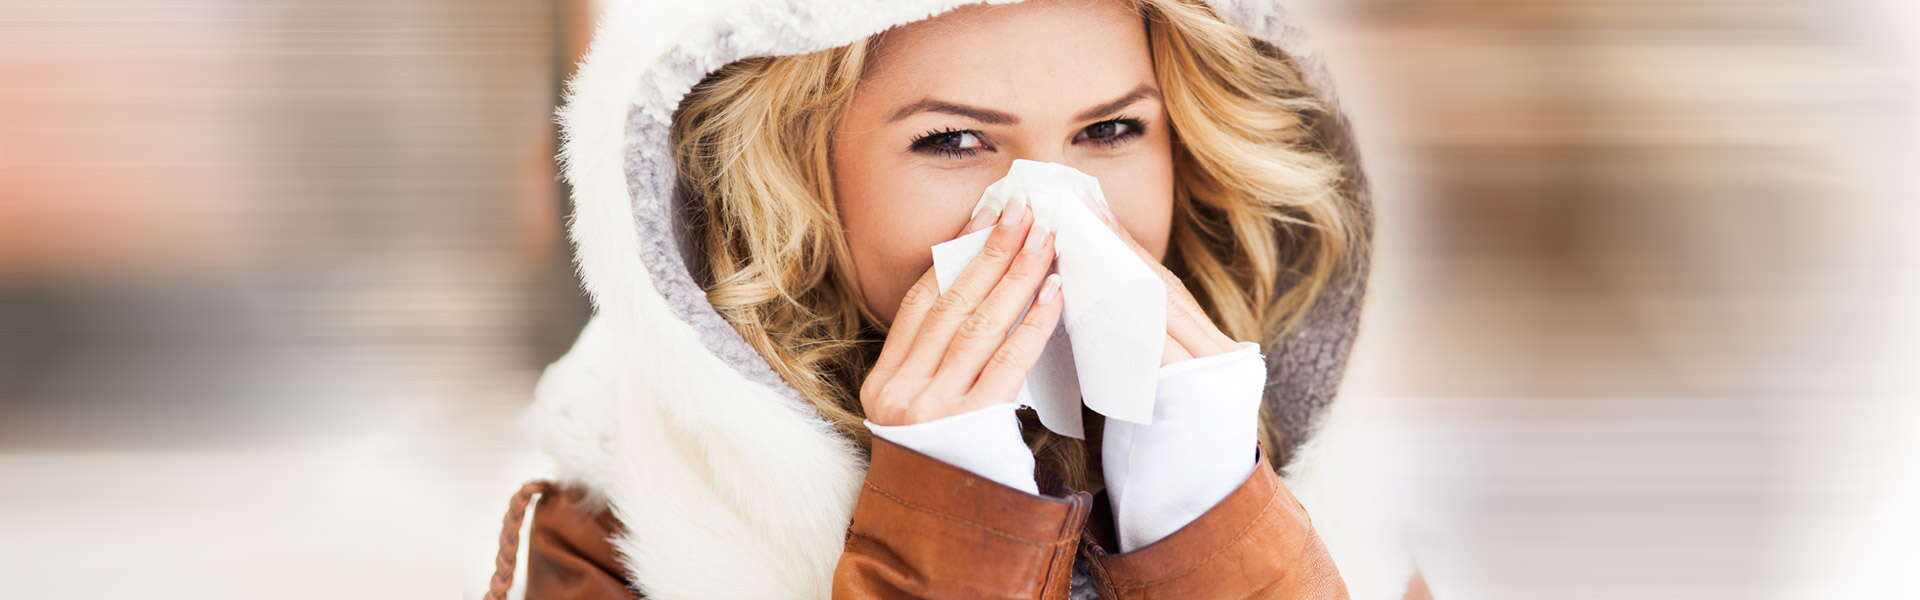 How to cure a cold: symptoms, causes and remedies